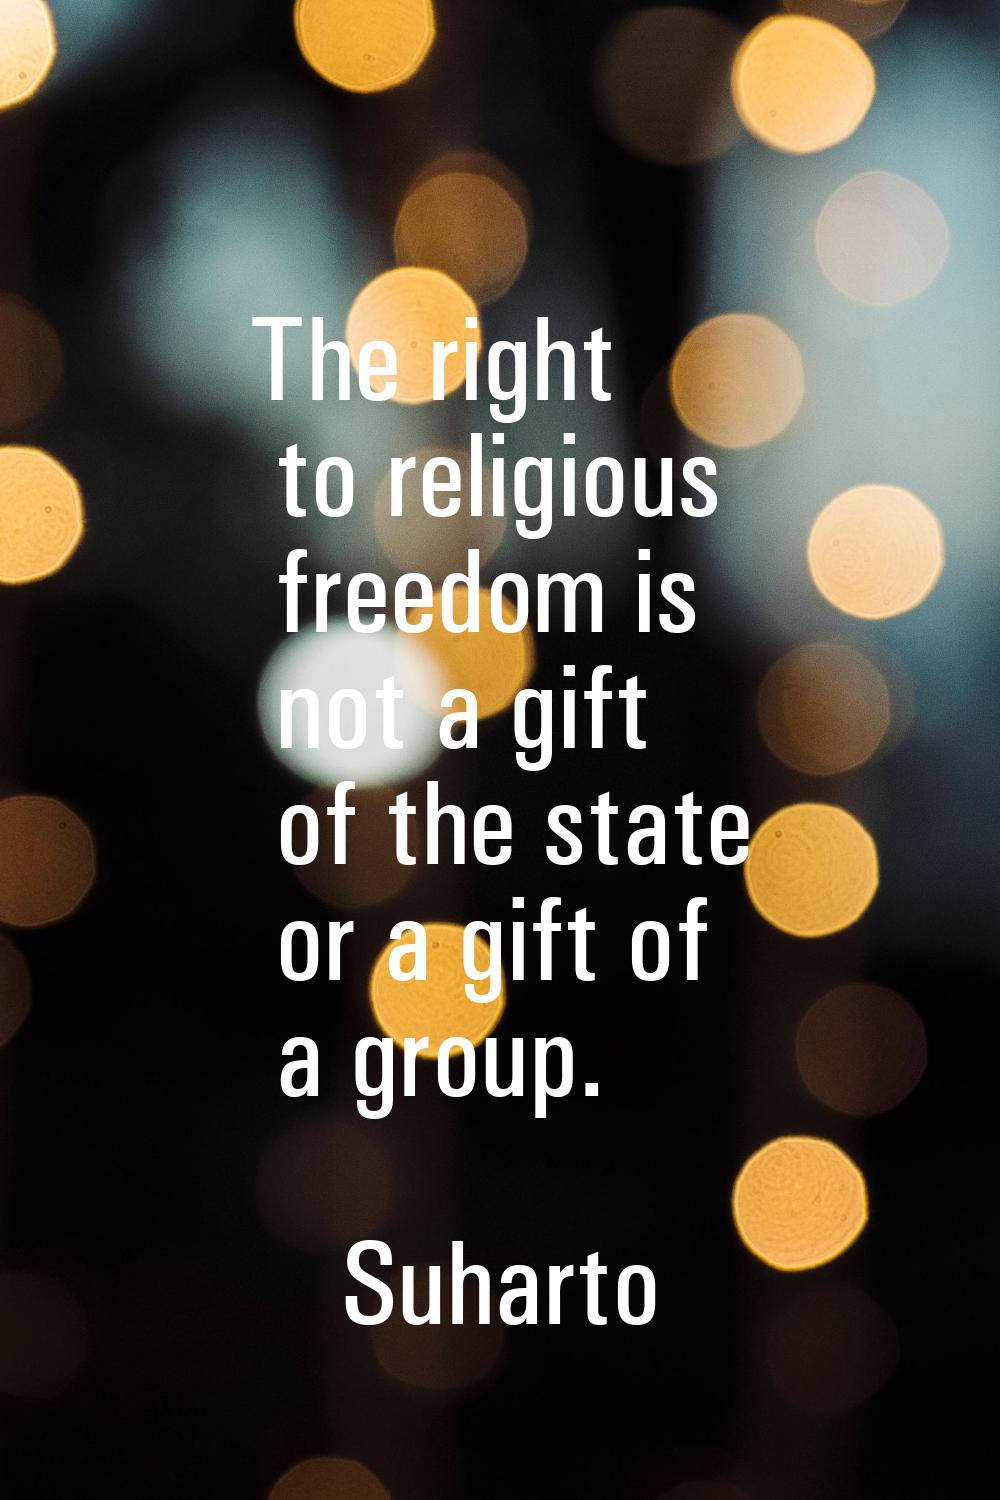 The right to religious freedom is not a gift of the state or a gift of a group.